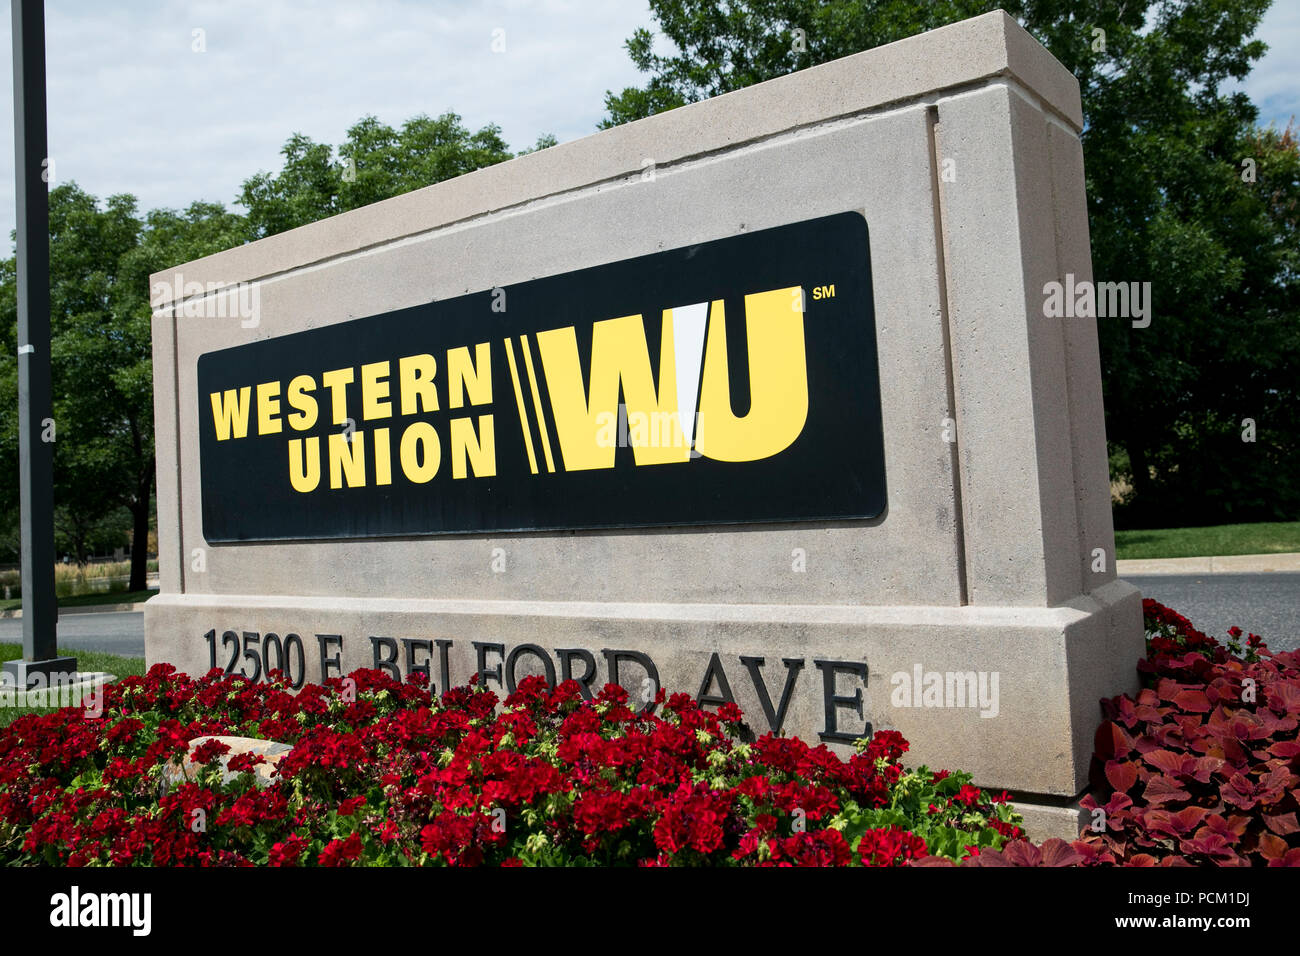 Western Union Office High Resolution Stock Photography and Images - Alamy